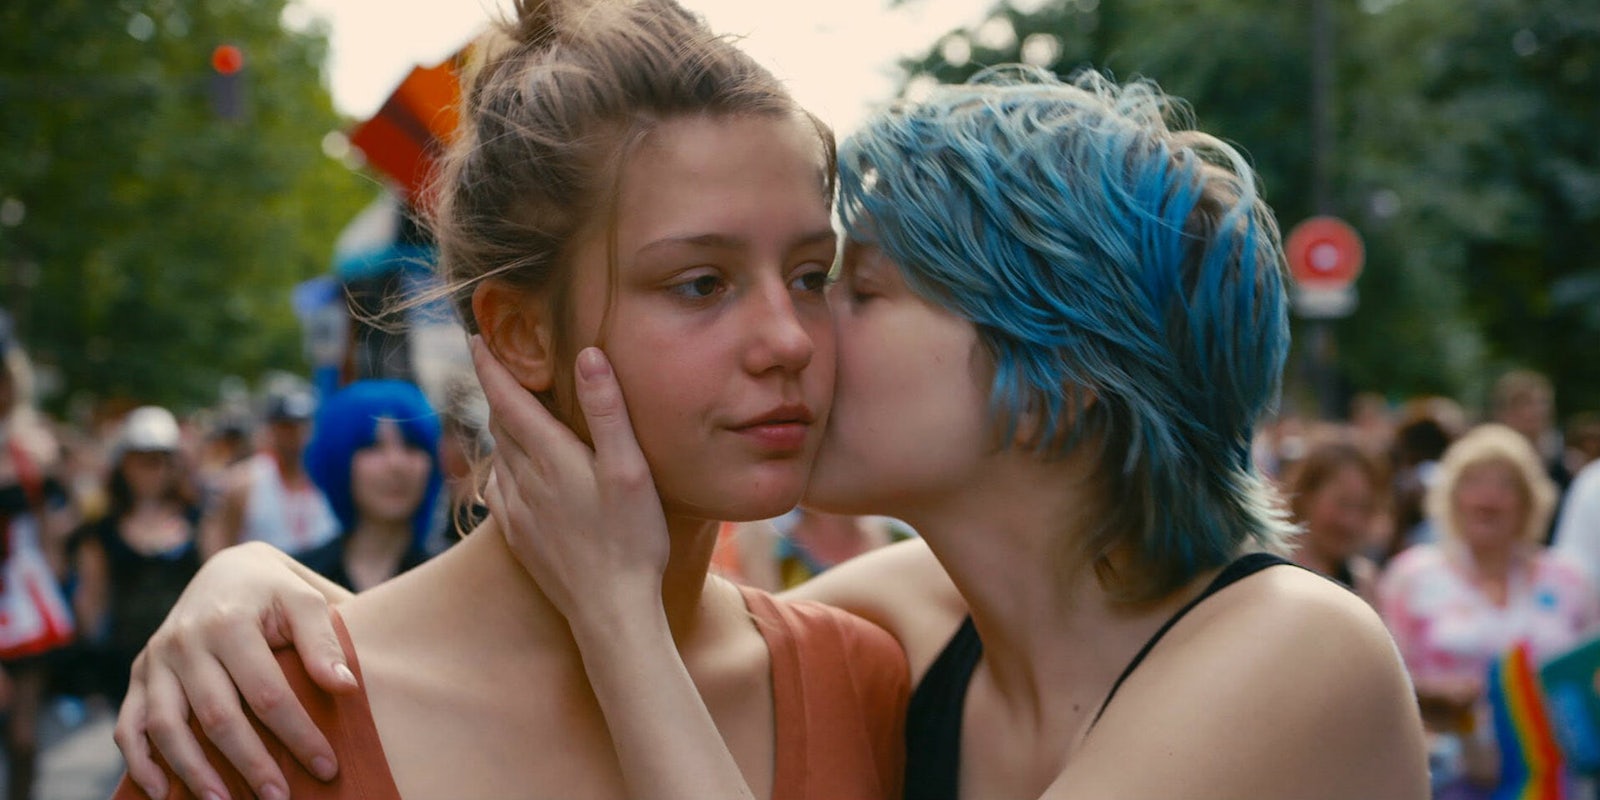 indie lgbtq movies on netflix : Blue is the Warmest Color